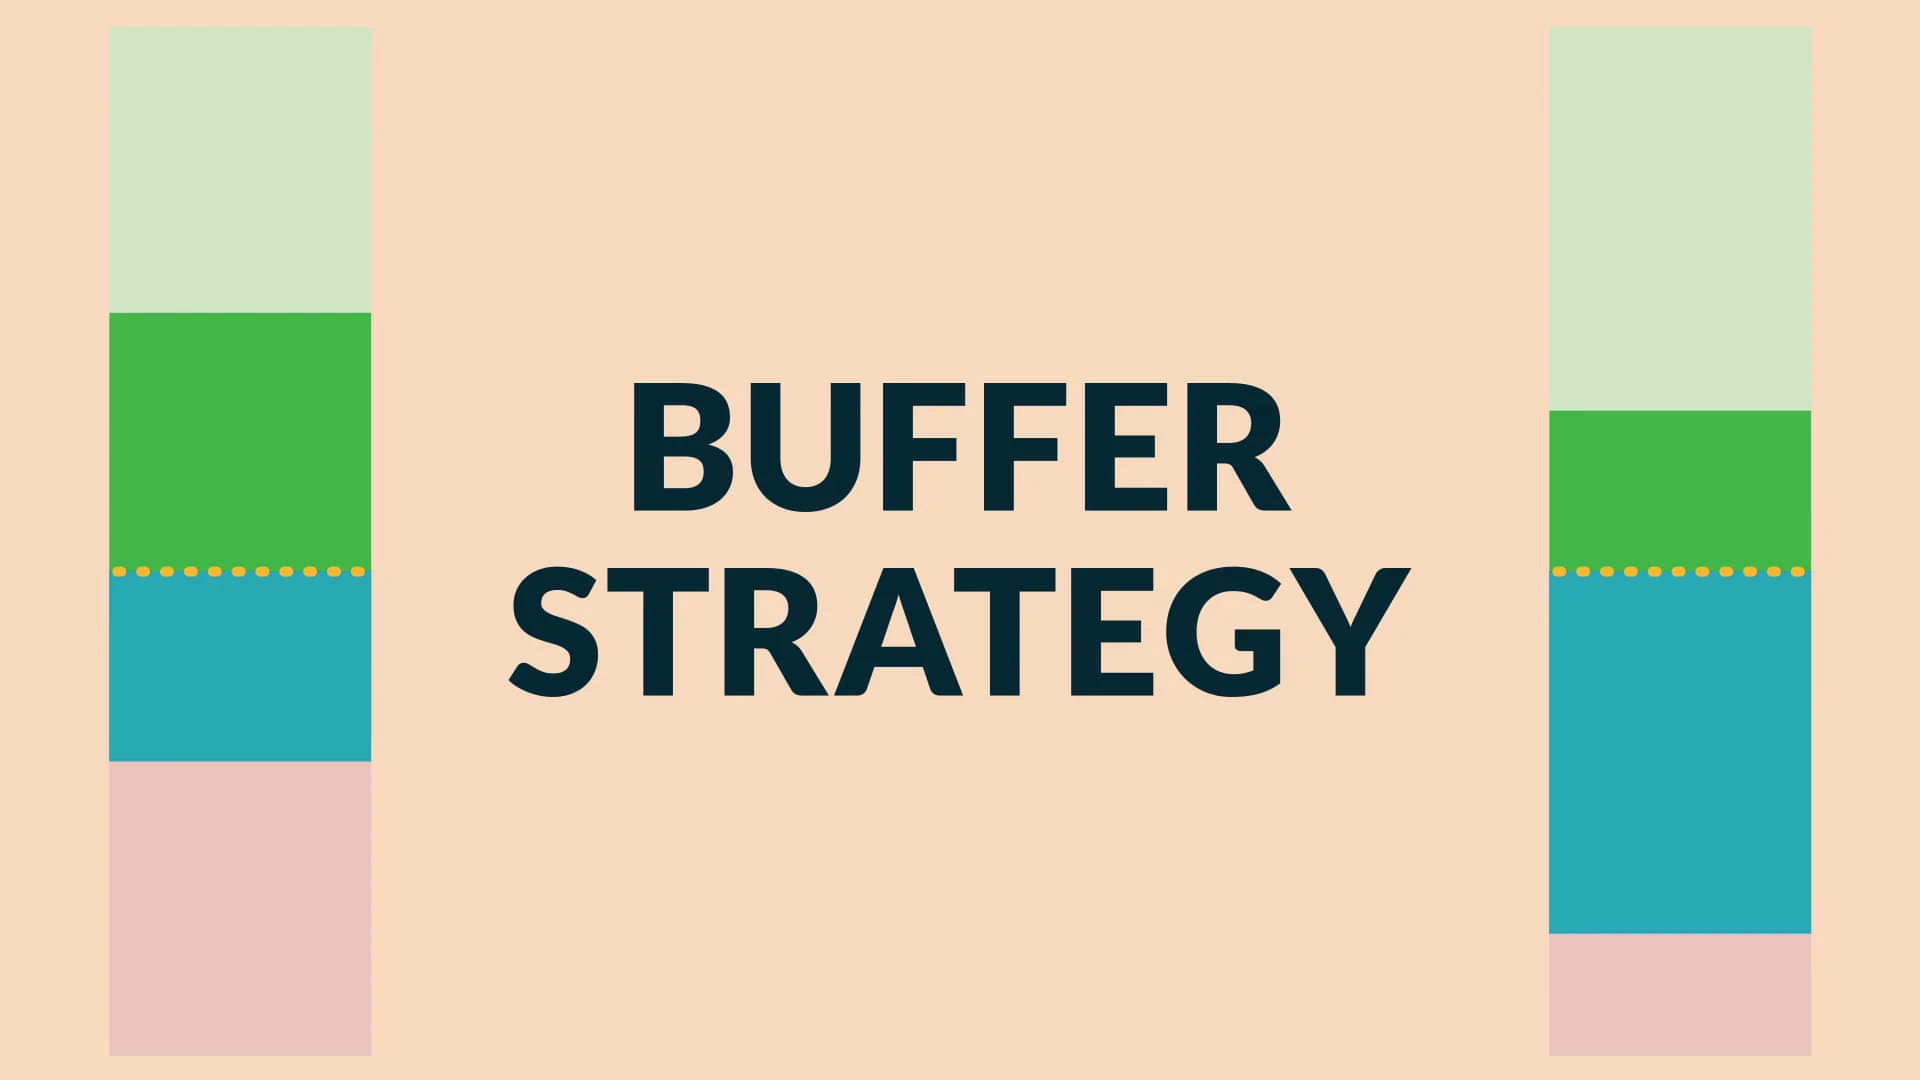 Buffer Solutions: Definition, Types, Preparation, Examples and Videos